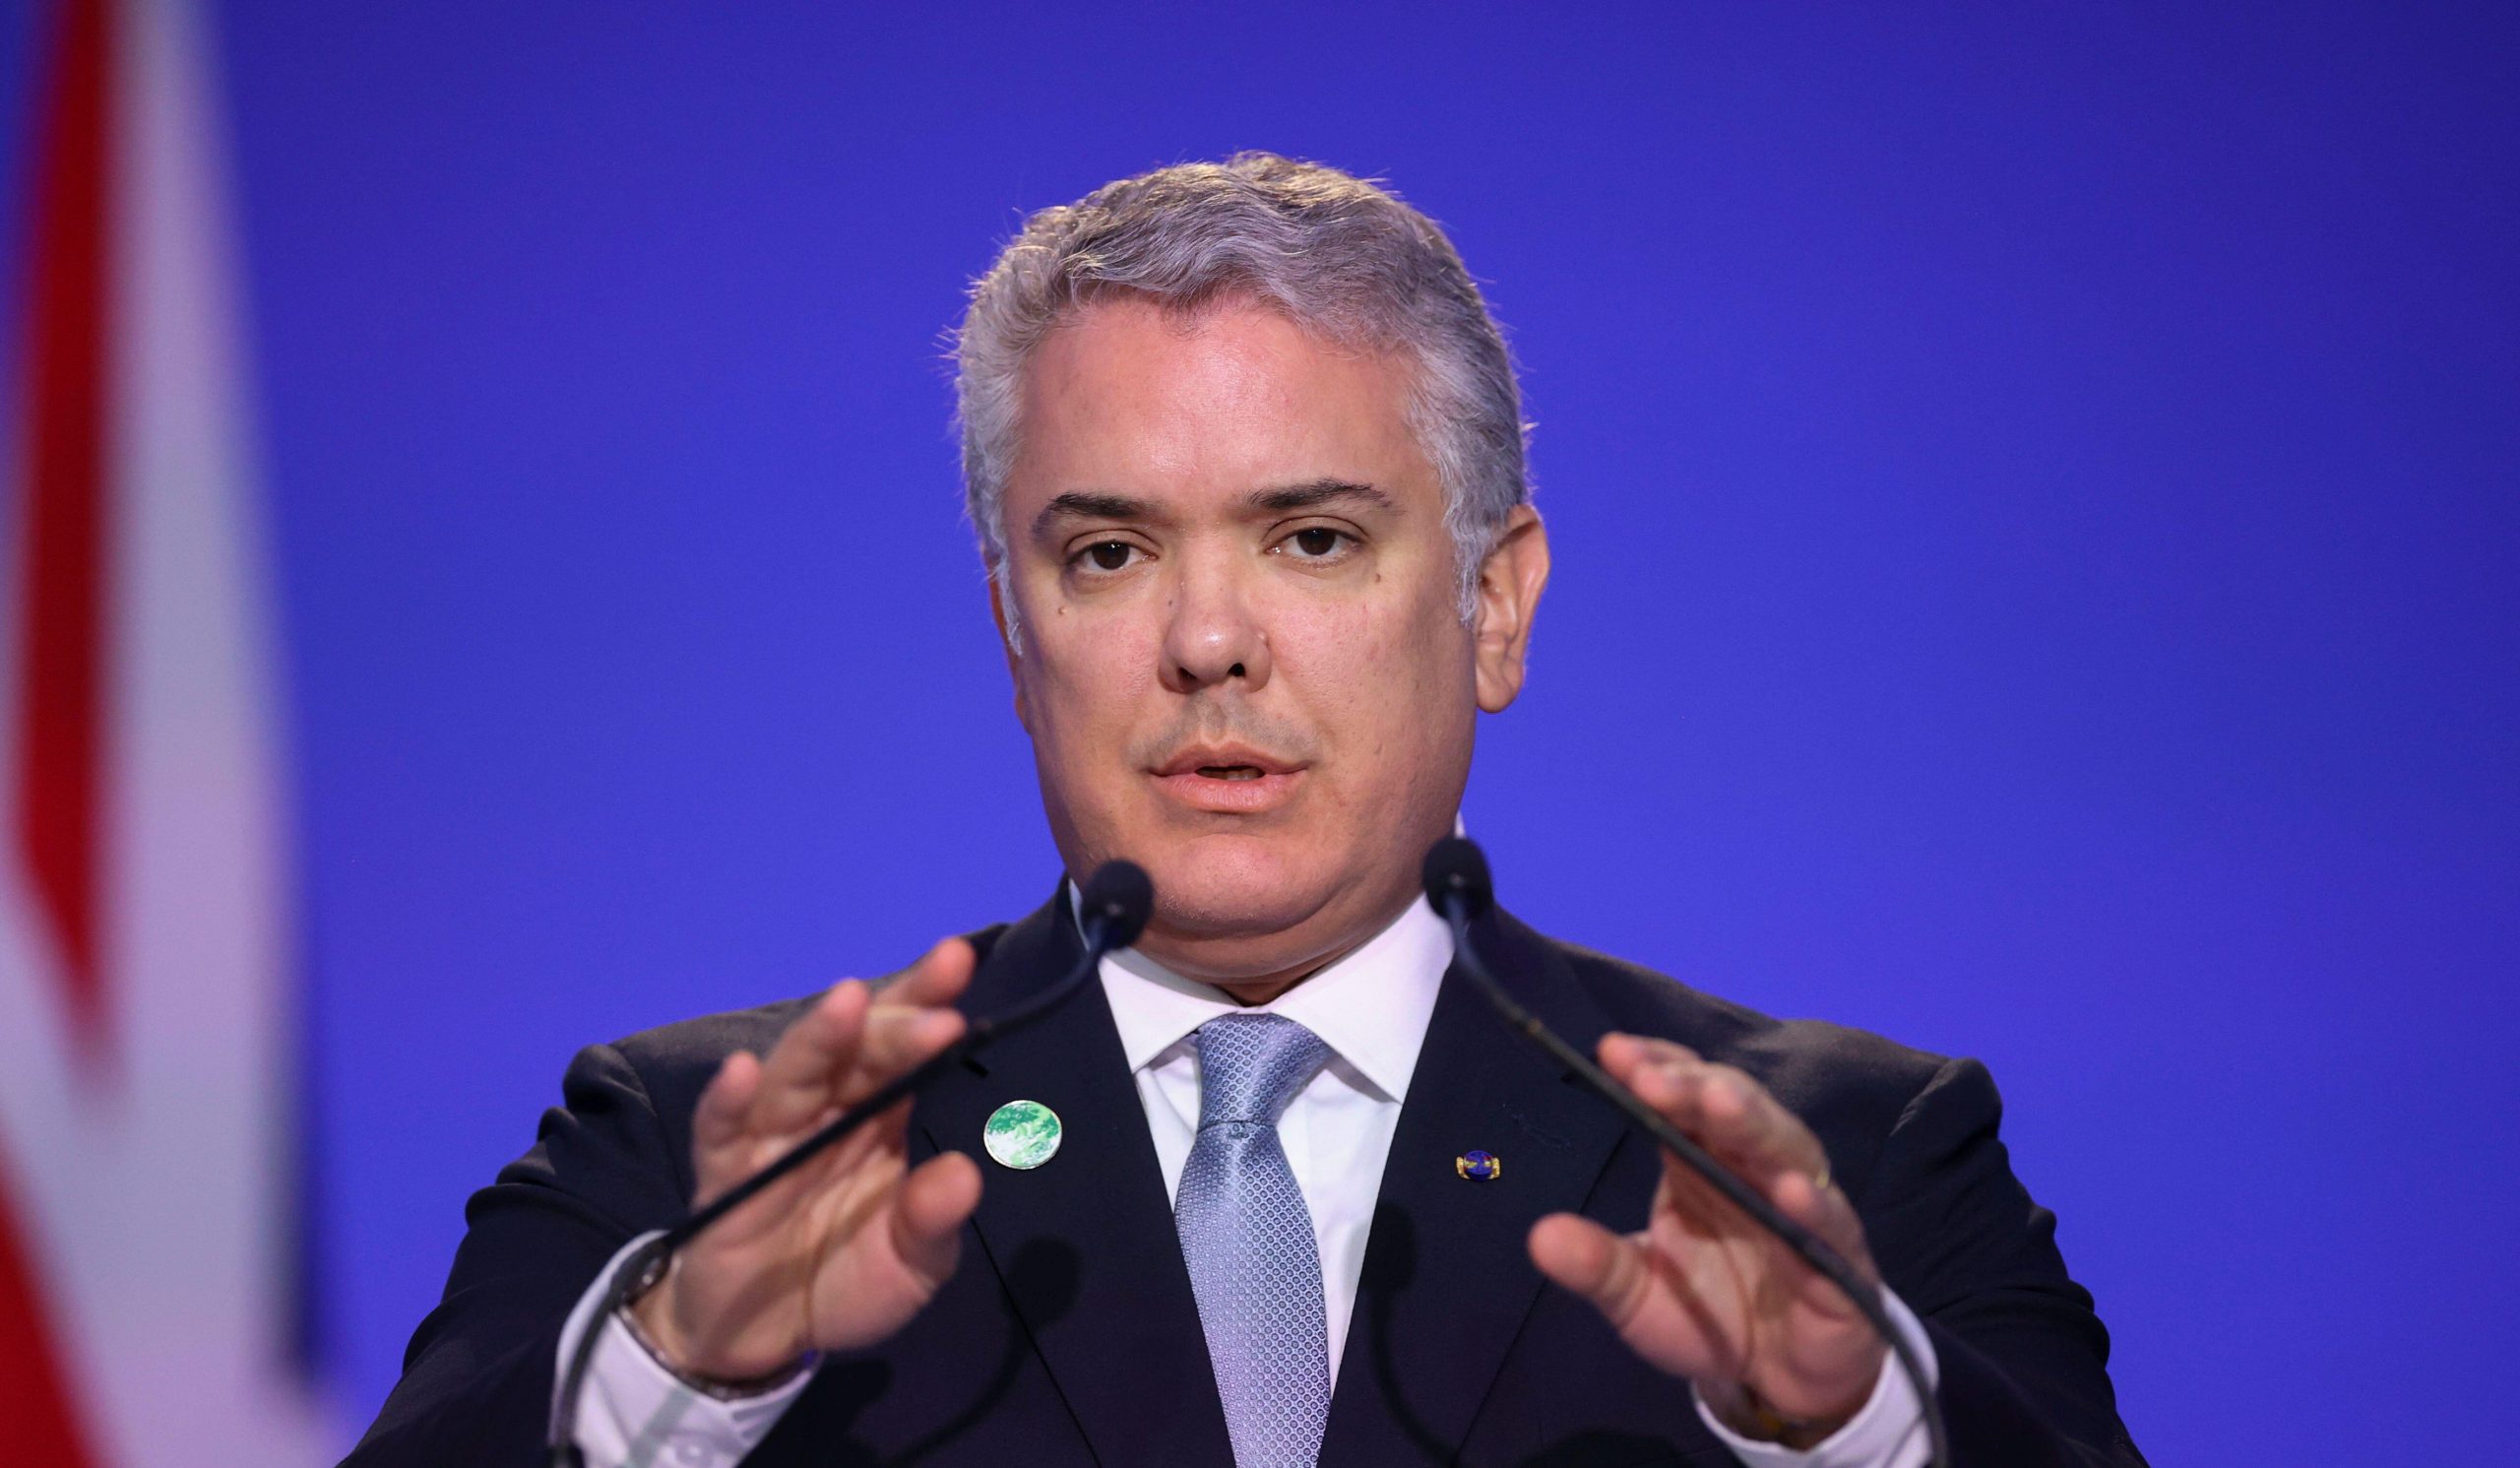 ivan duque, former president of colombia, speaks at an event